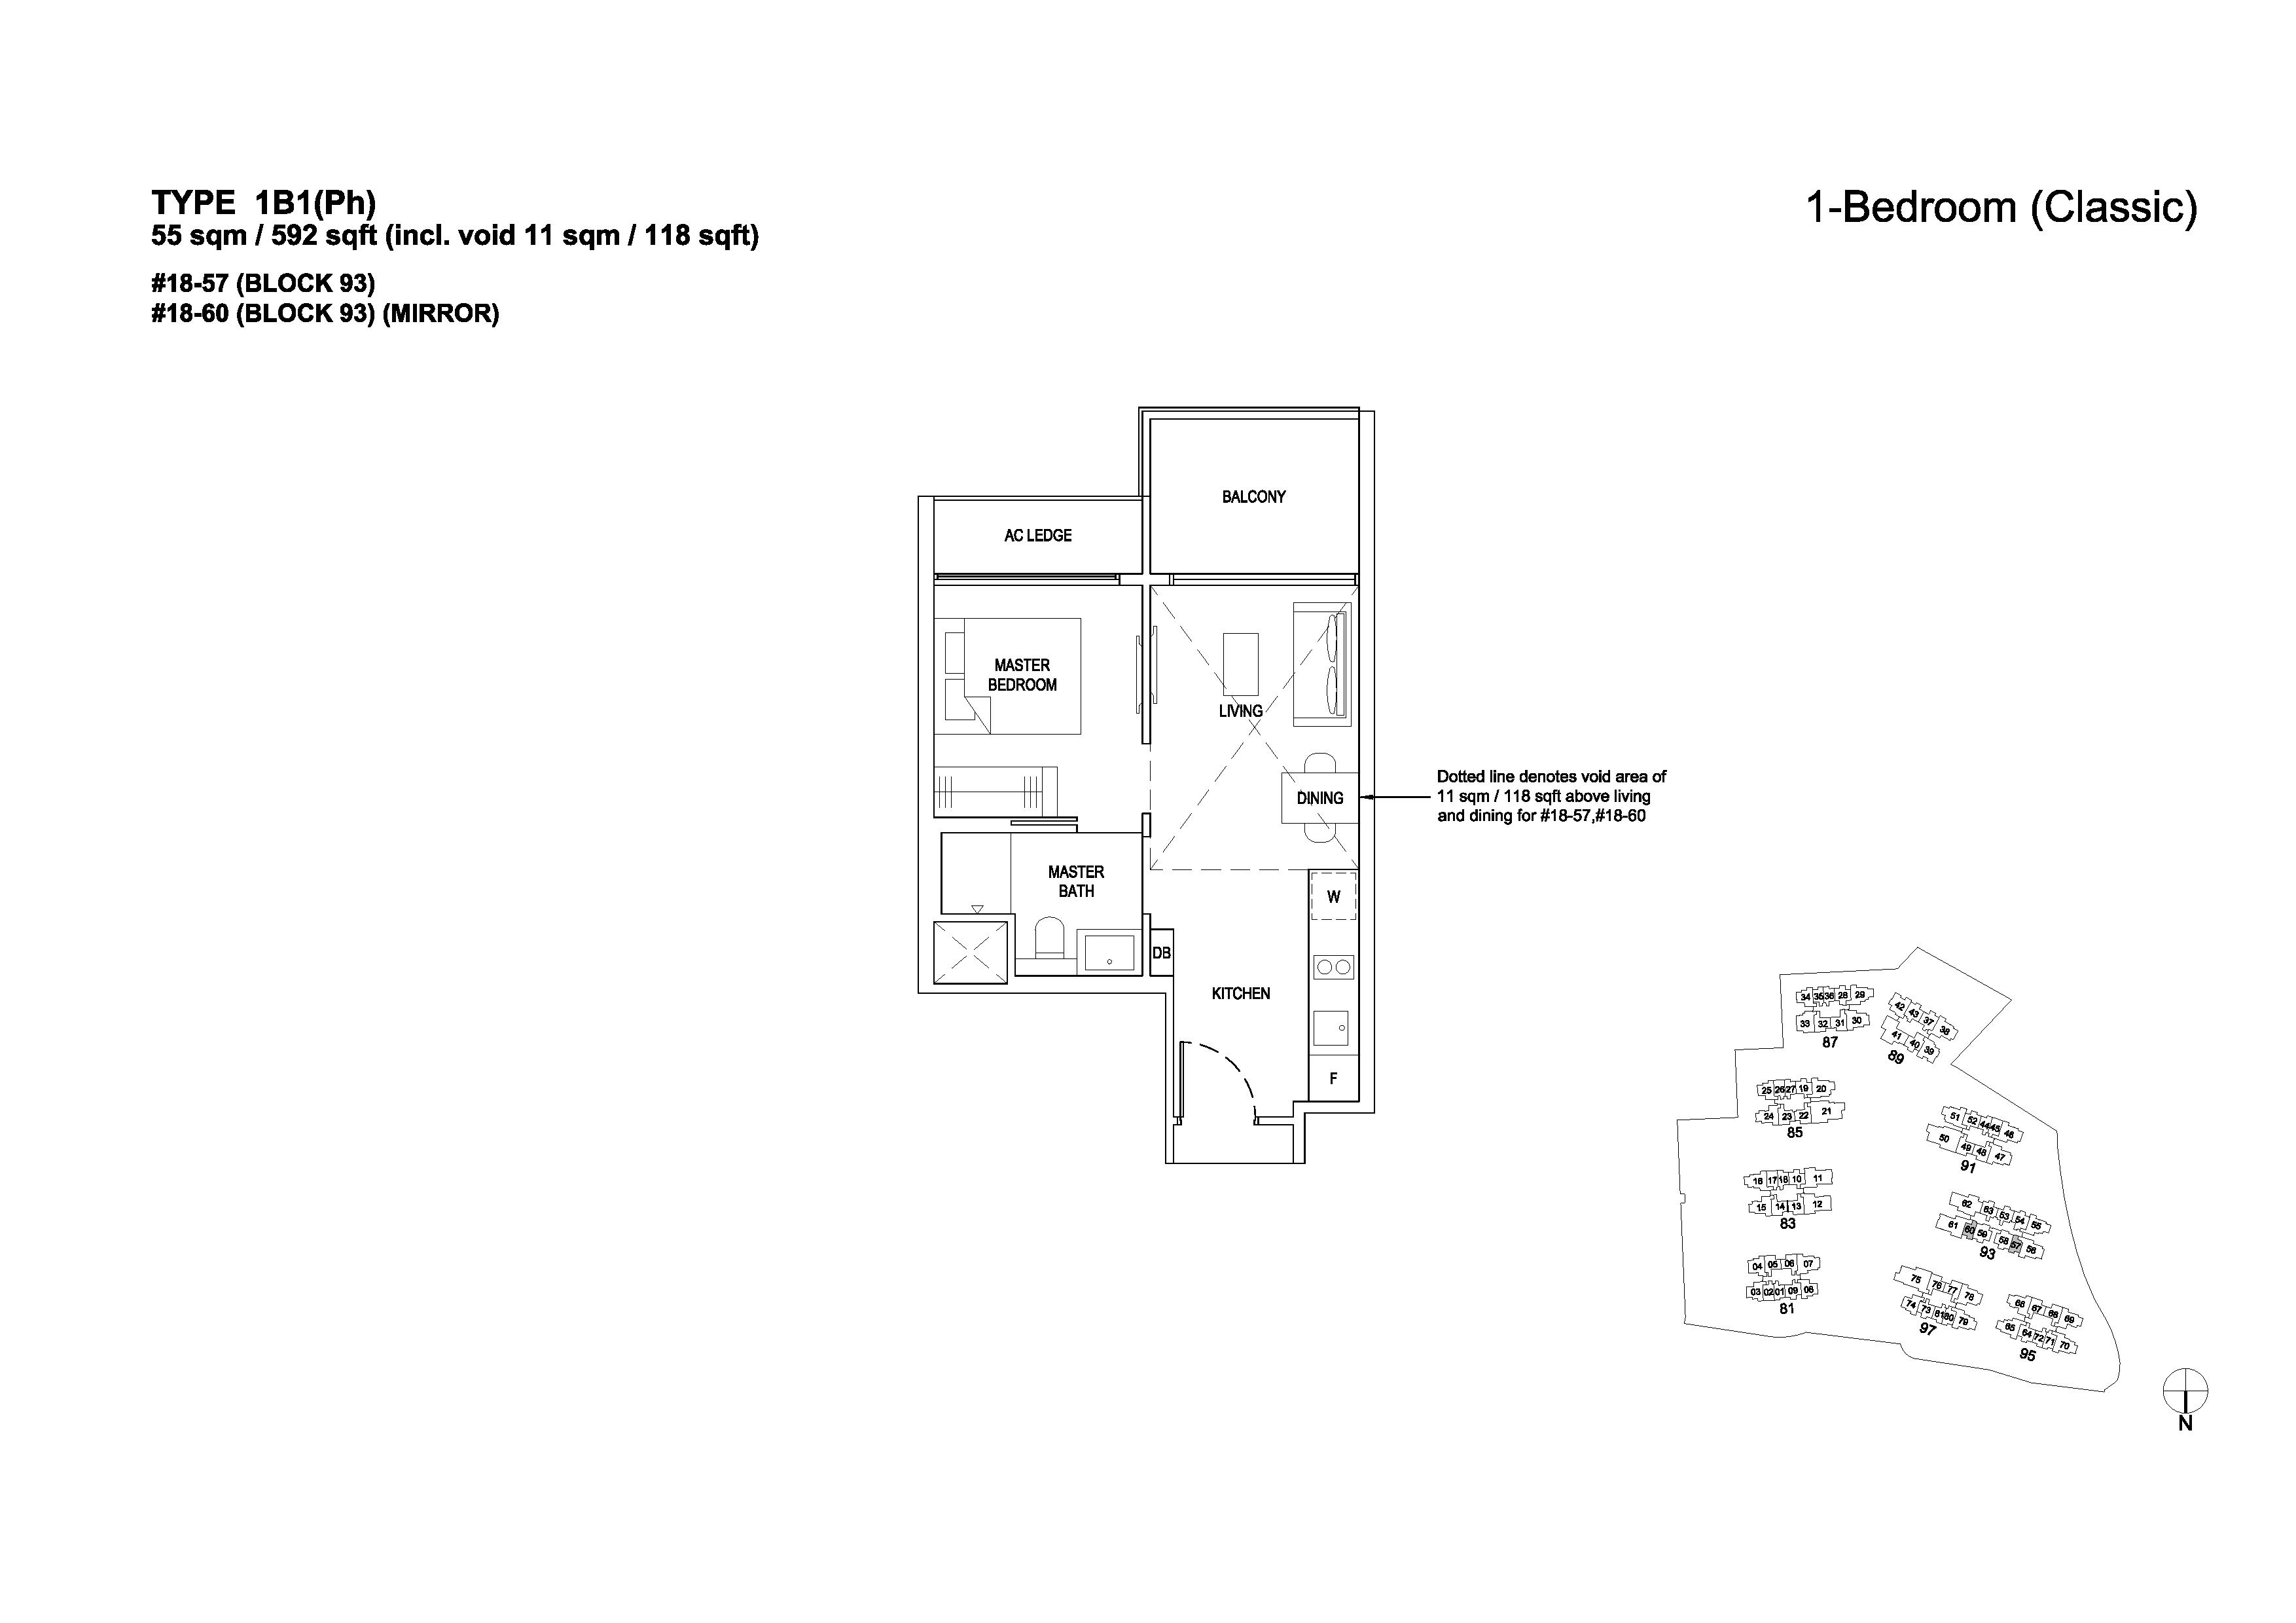 The Florence Residences 1 Bedroom Classic Type 1B1(Ph) Floor Plans